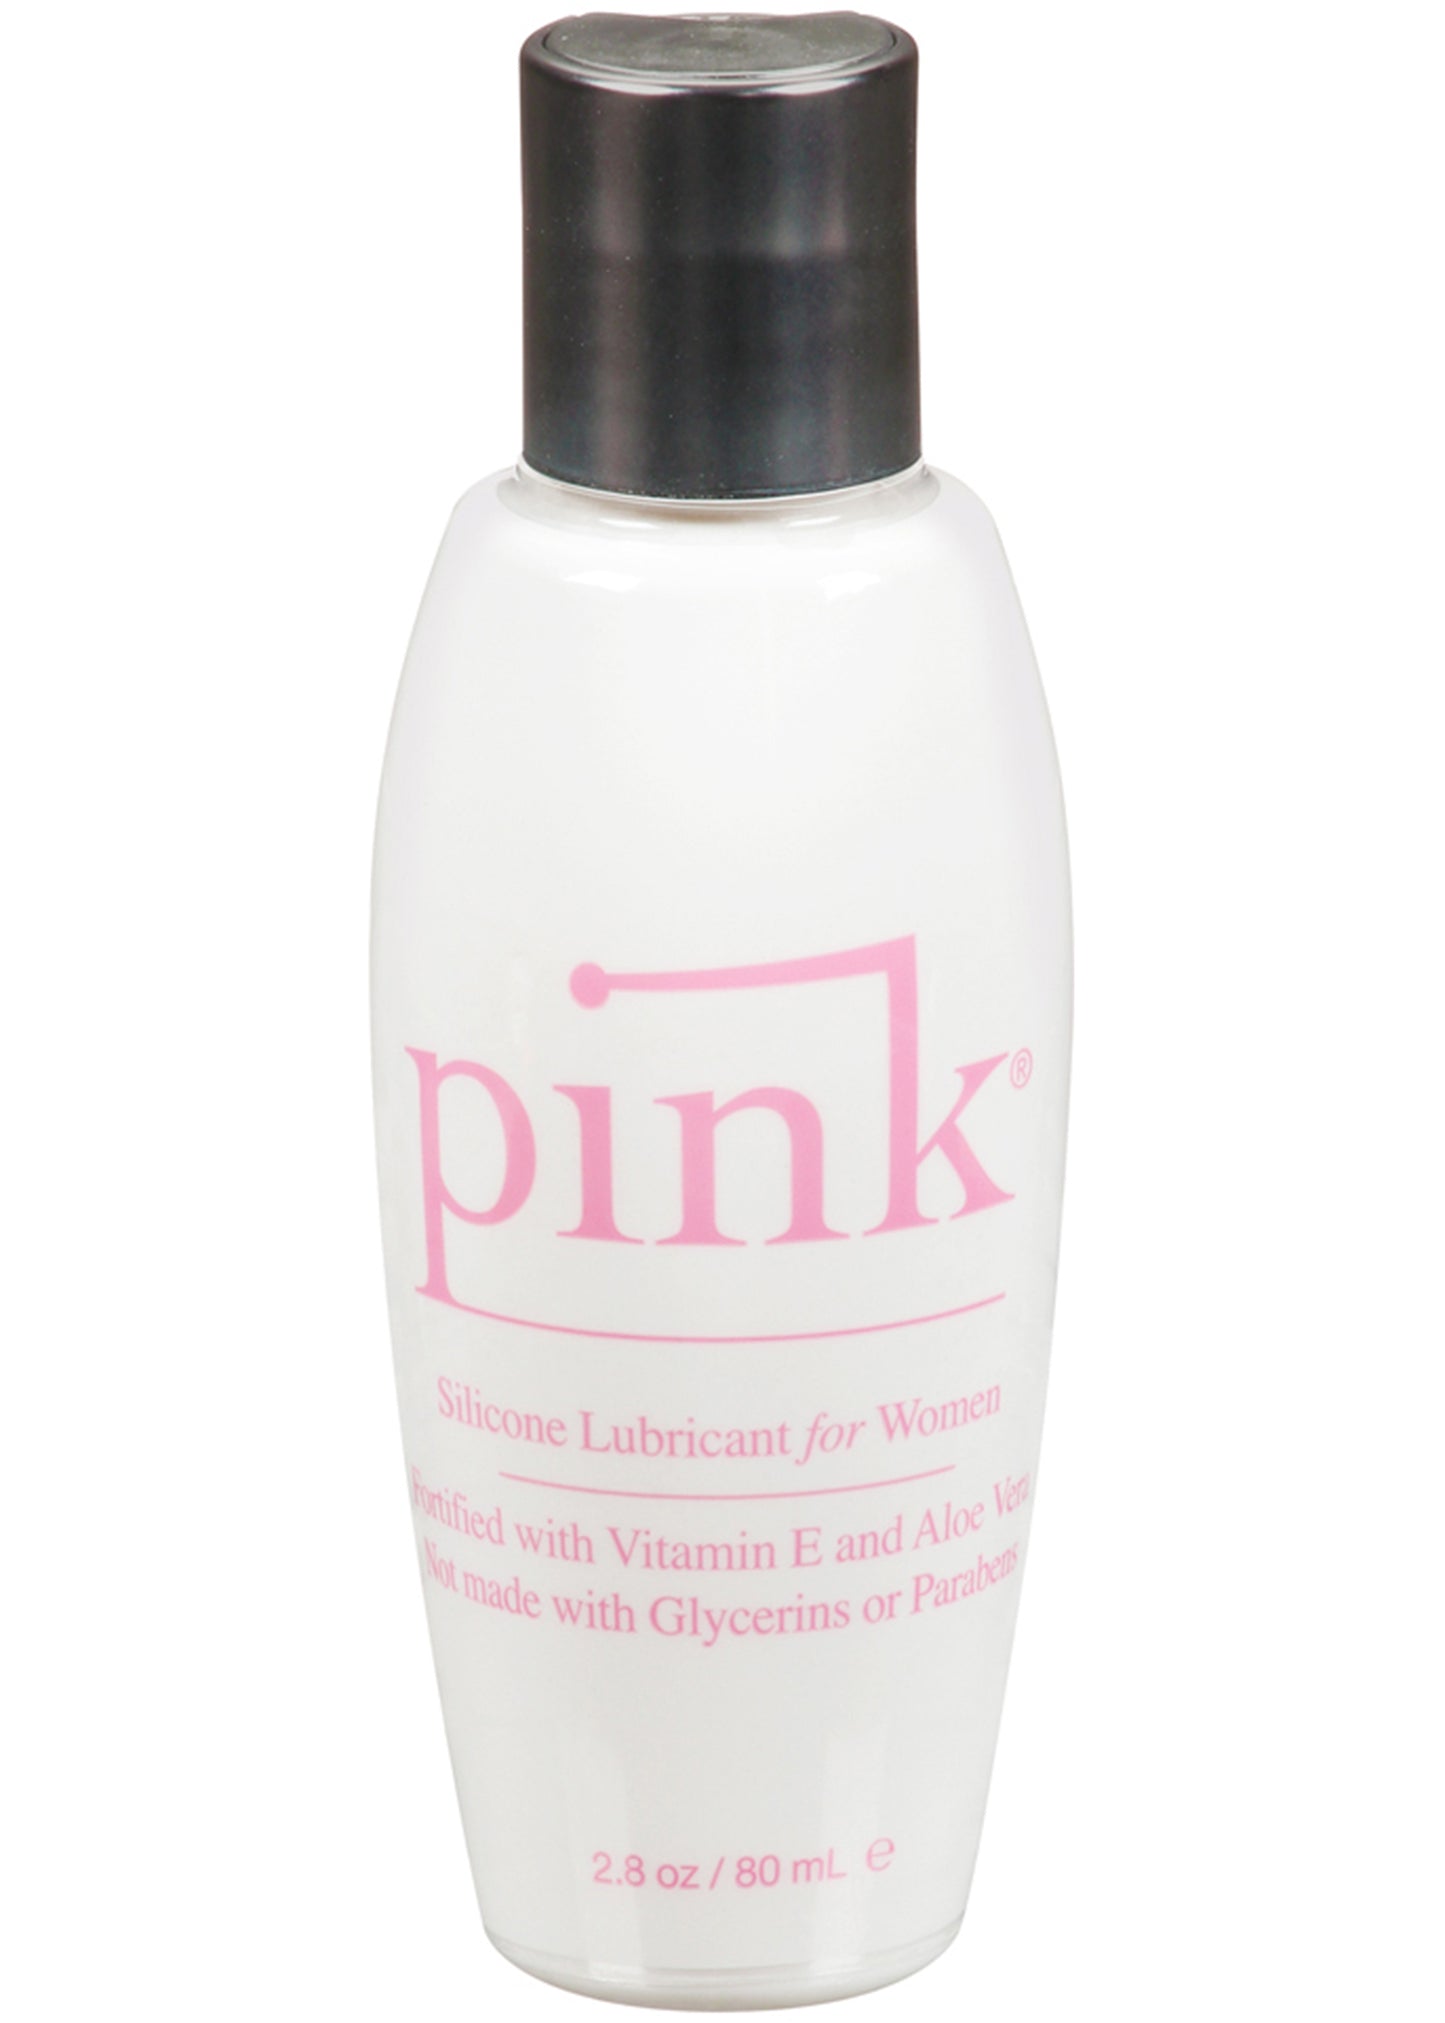 Pink - Silicone Lubricant - 2.8 Oz - 80 ml